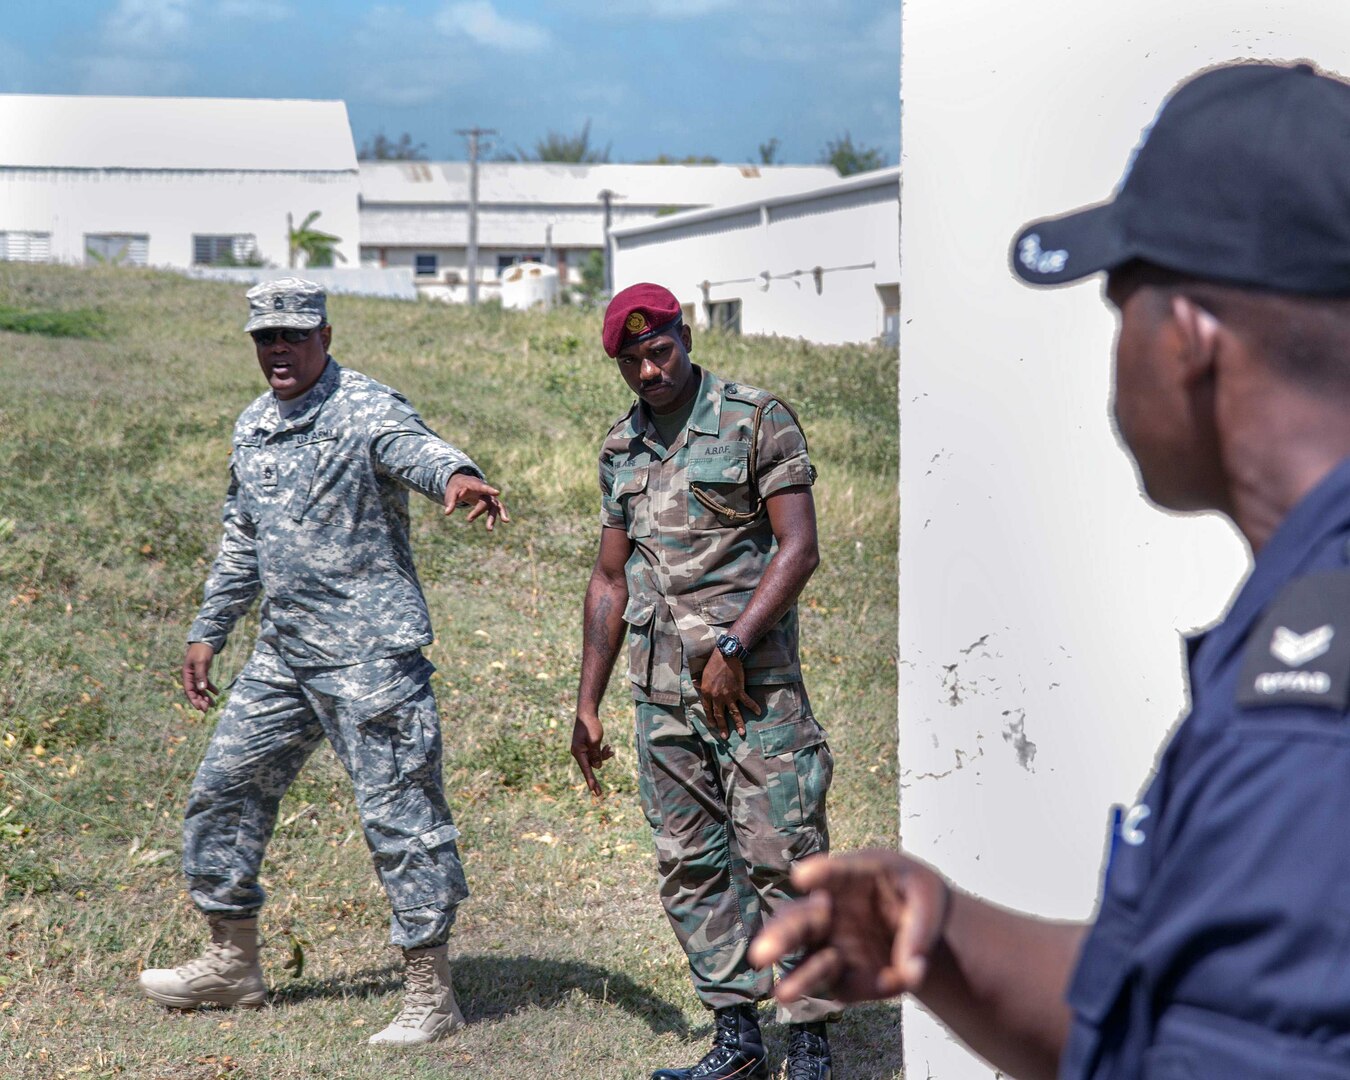 Army Sgt. 1st Class Calvin Allen, a facilitator with the Florida Army National Guard's 211th Regiment, shares his knowledge of non-verbal communication techniques, in St. John's, Antigua, Aug. 15, 2013. The seminar is part of the on-going Florida National Guard's State Partnership Program Exchange and is intended to help the process of further developing junior noncommissioned officers within the ABDF and the Antigua Police Force.